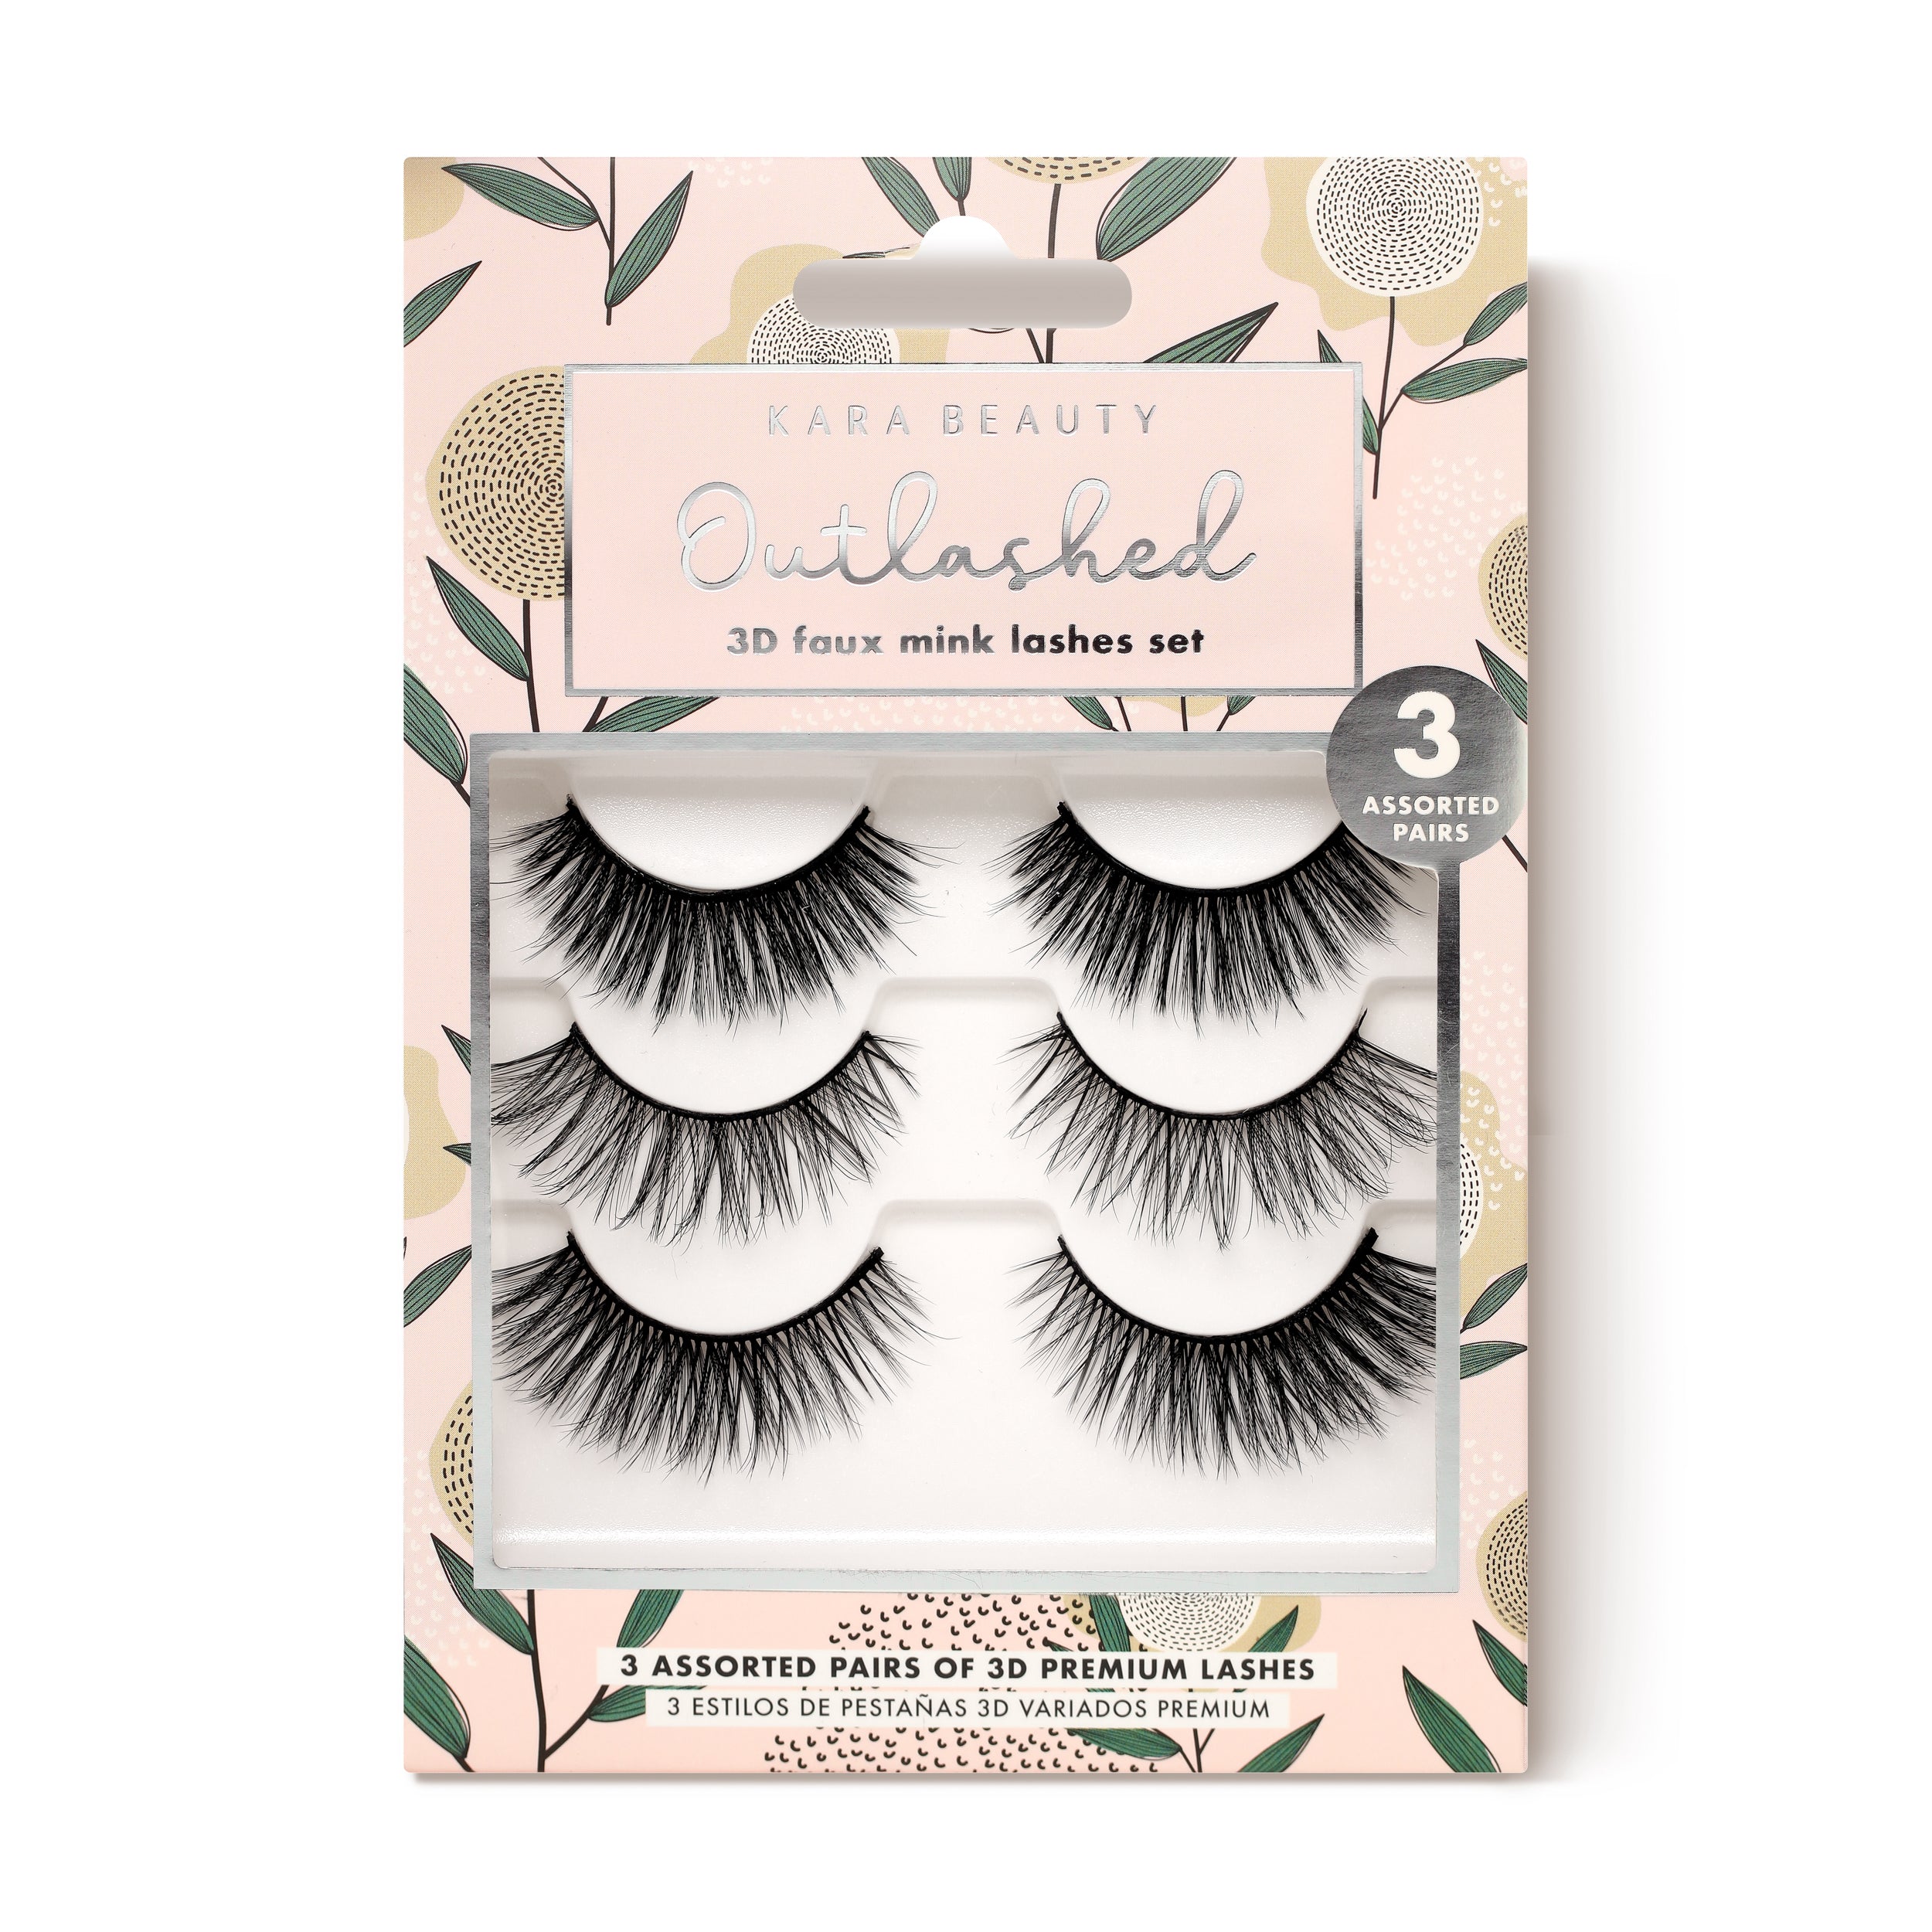 KL3207 OUTLASHED 3D Faux Mink Lashes 3 PAIRS ASSORTED